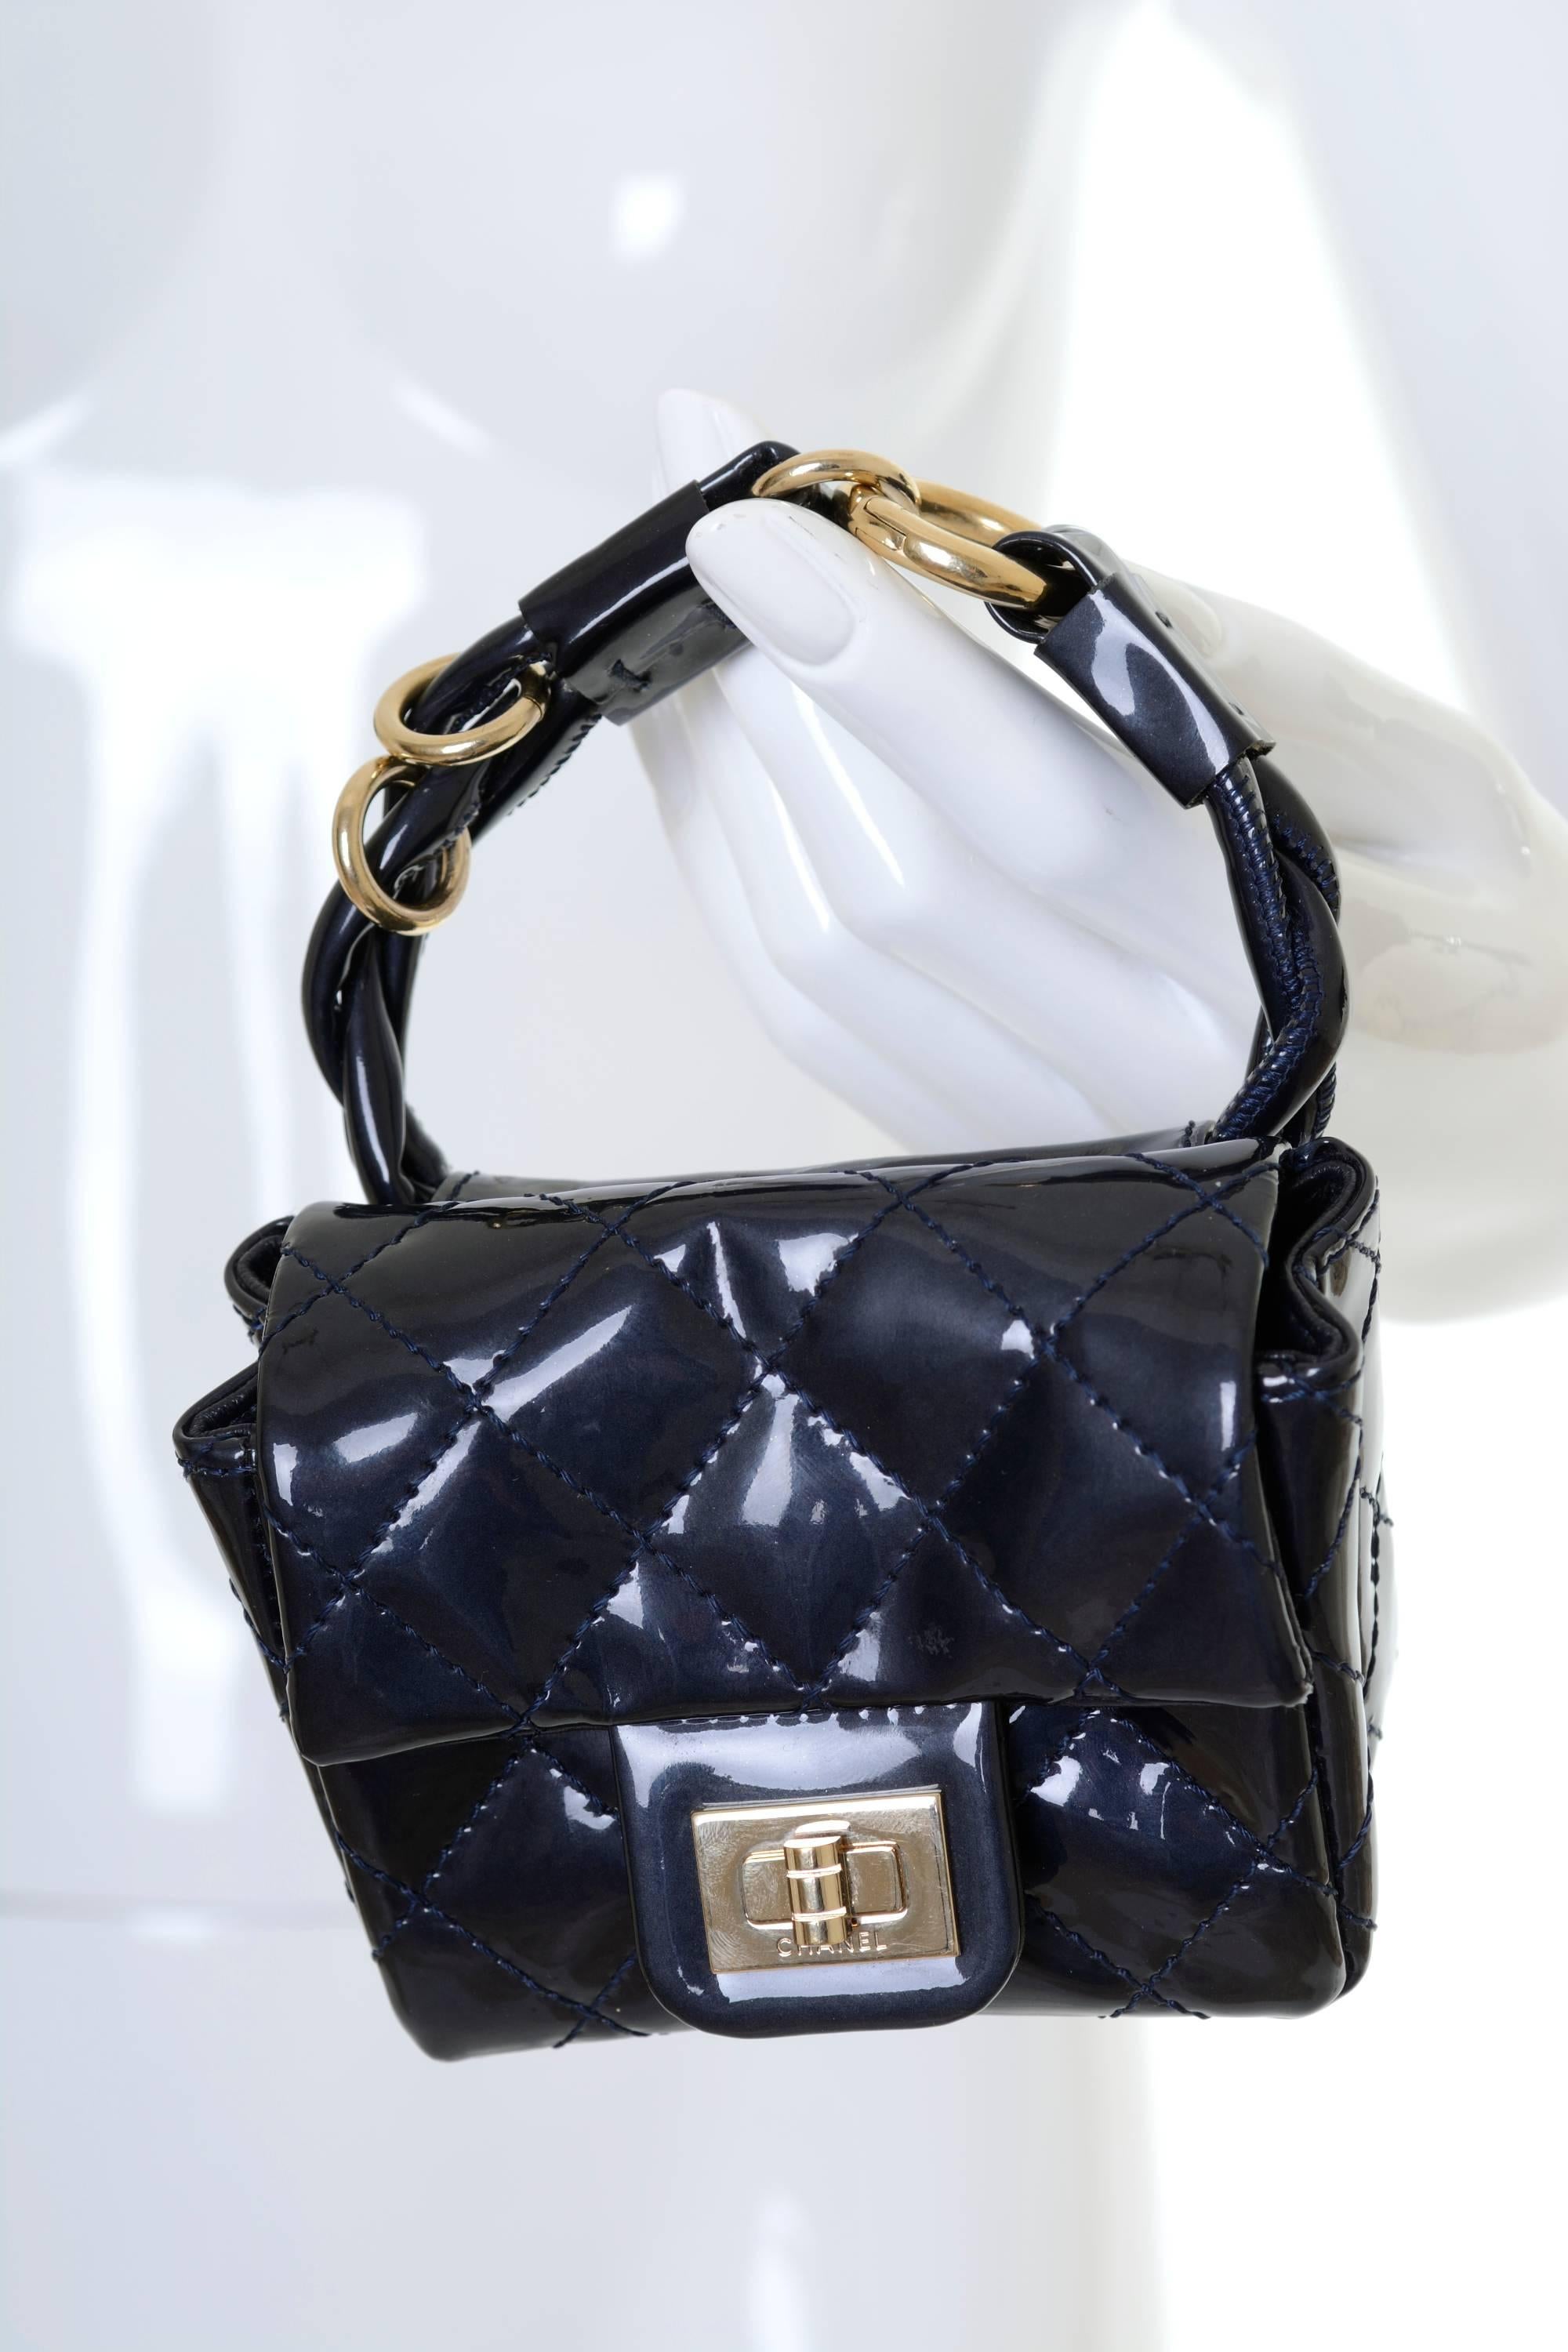 CHANEL Black Patent Leather Quilted Reissue Mini Belt Bag 4